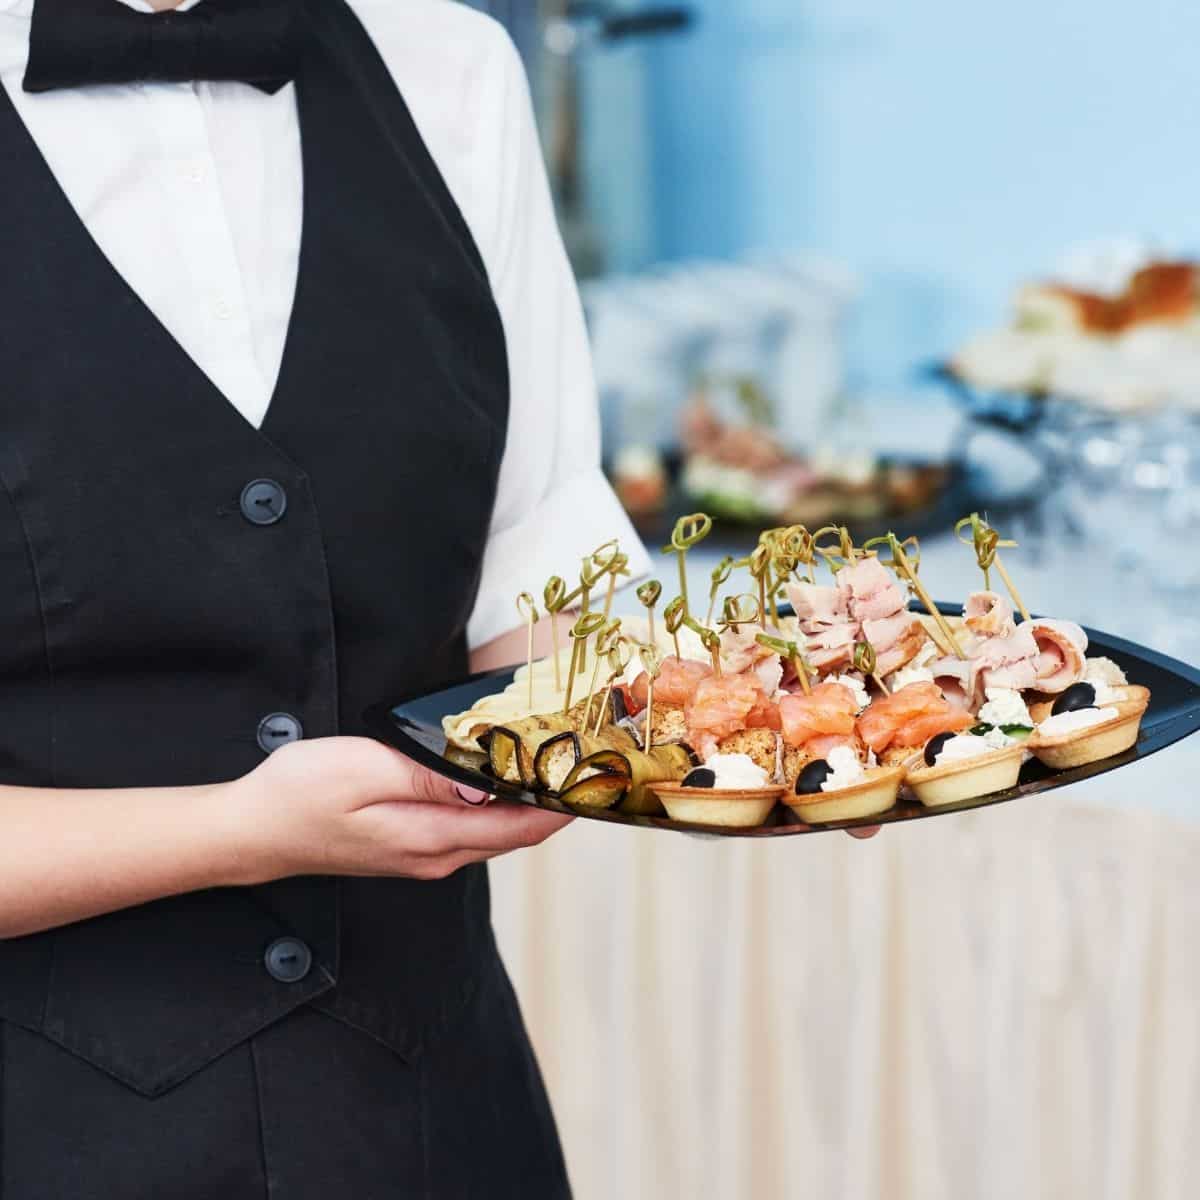 Caterer serving appetizers at a party.